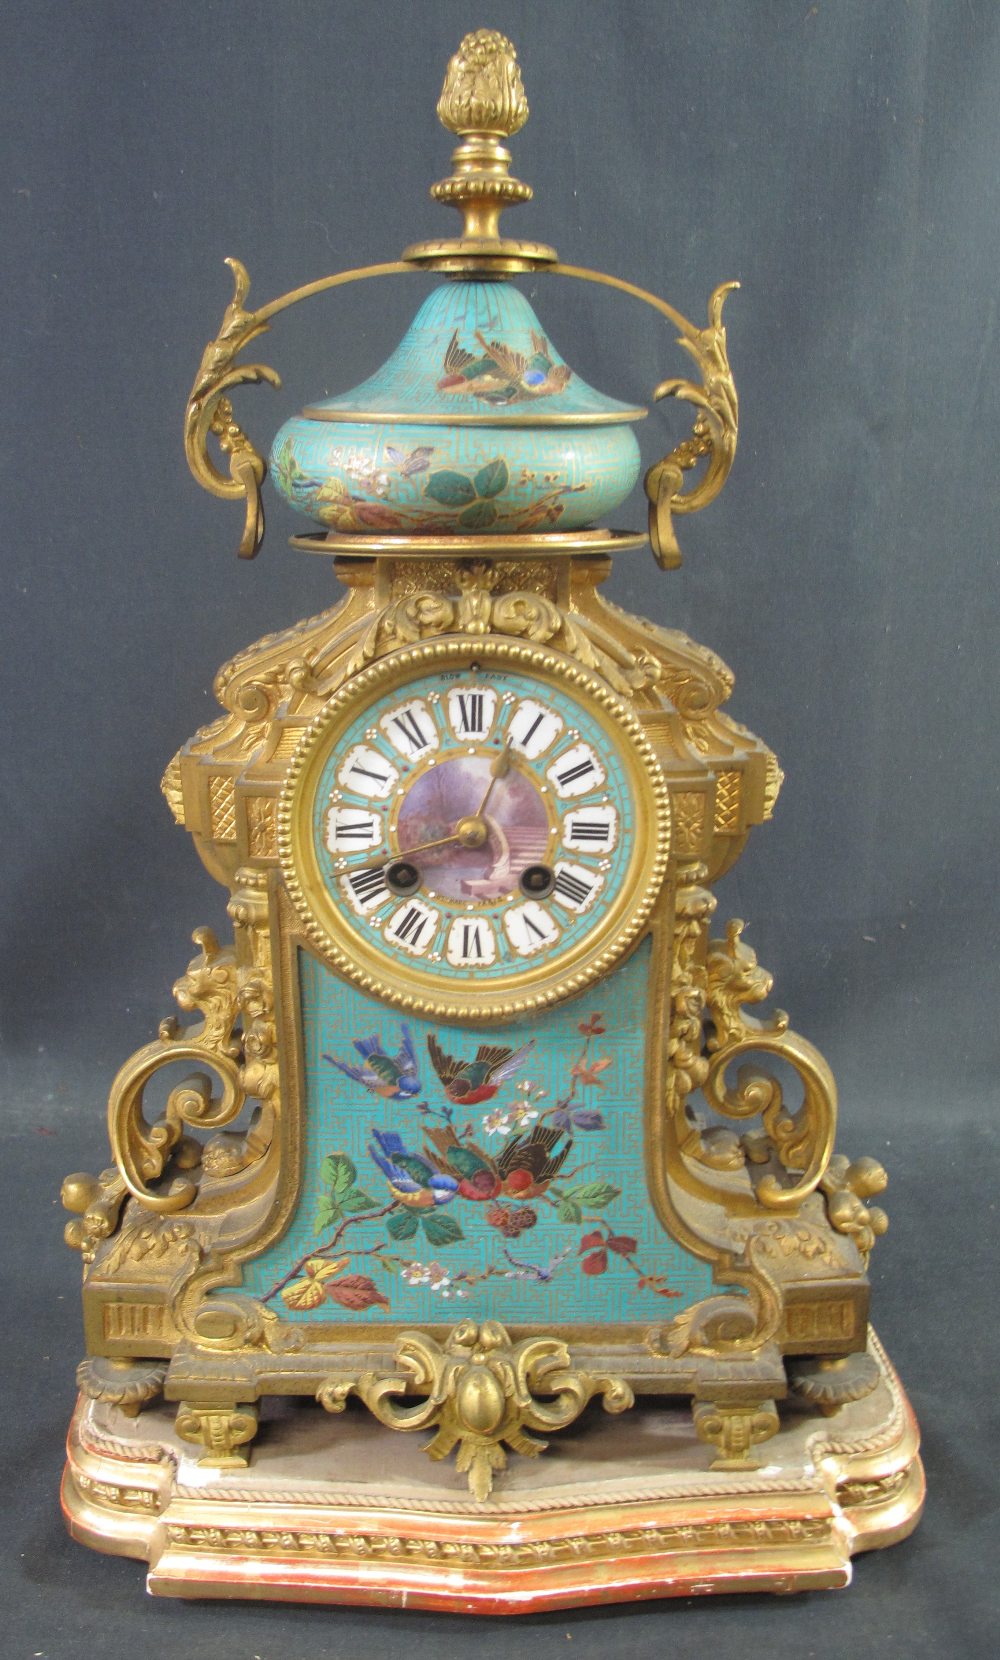 19TH CENTURY FRENCH ORMOLU TWO TRAIN MANTEL CLOCK in classical design with porcelain urn shaped